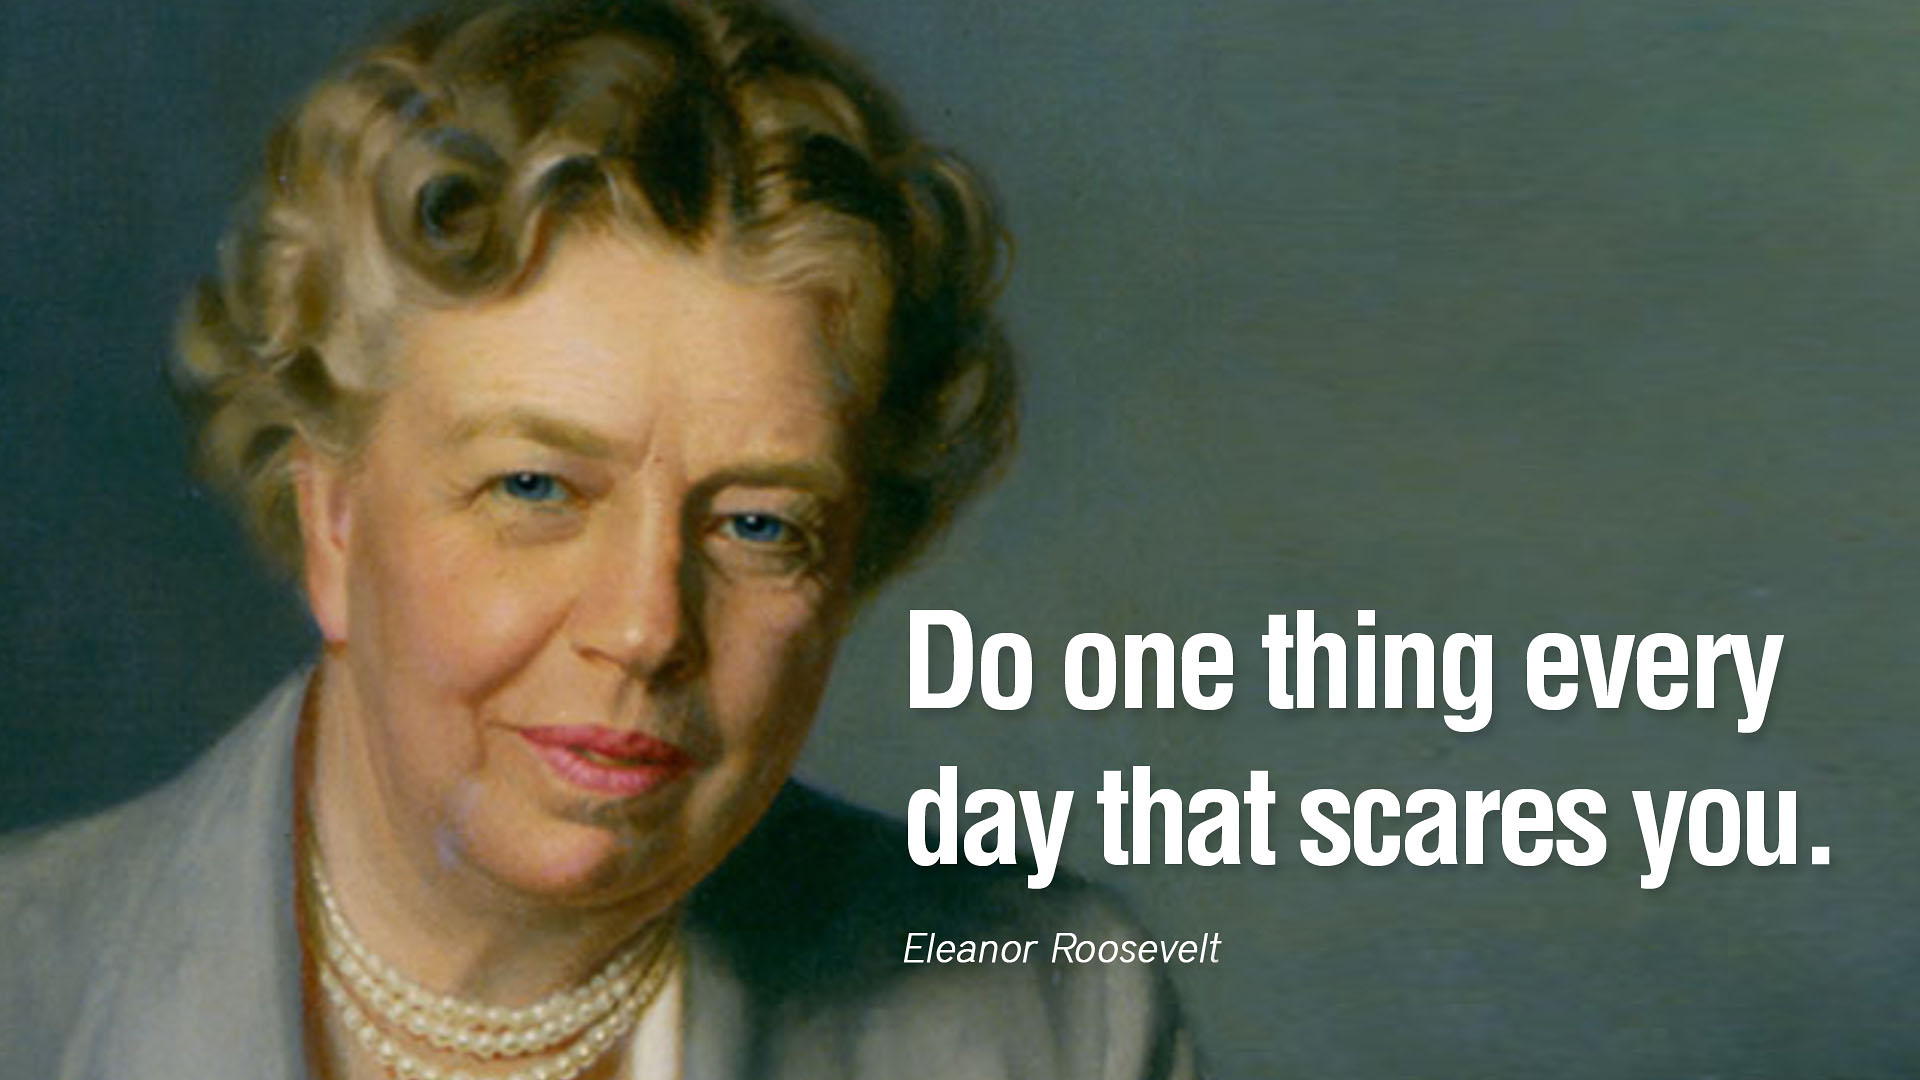 do-one-thing-every-day-that-scares-you